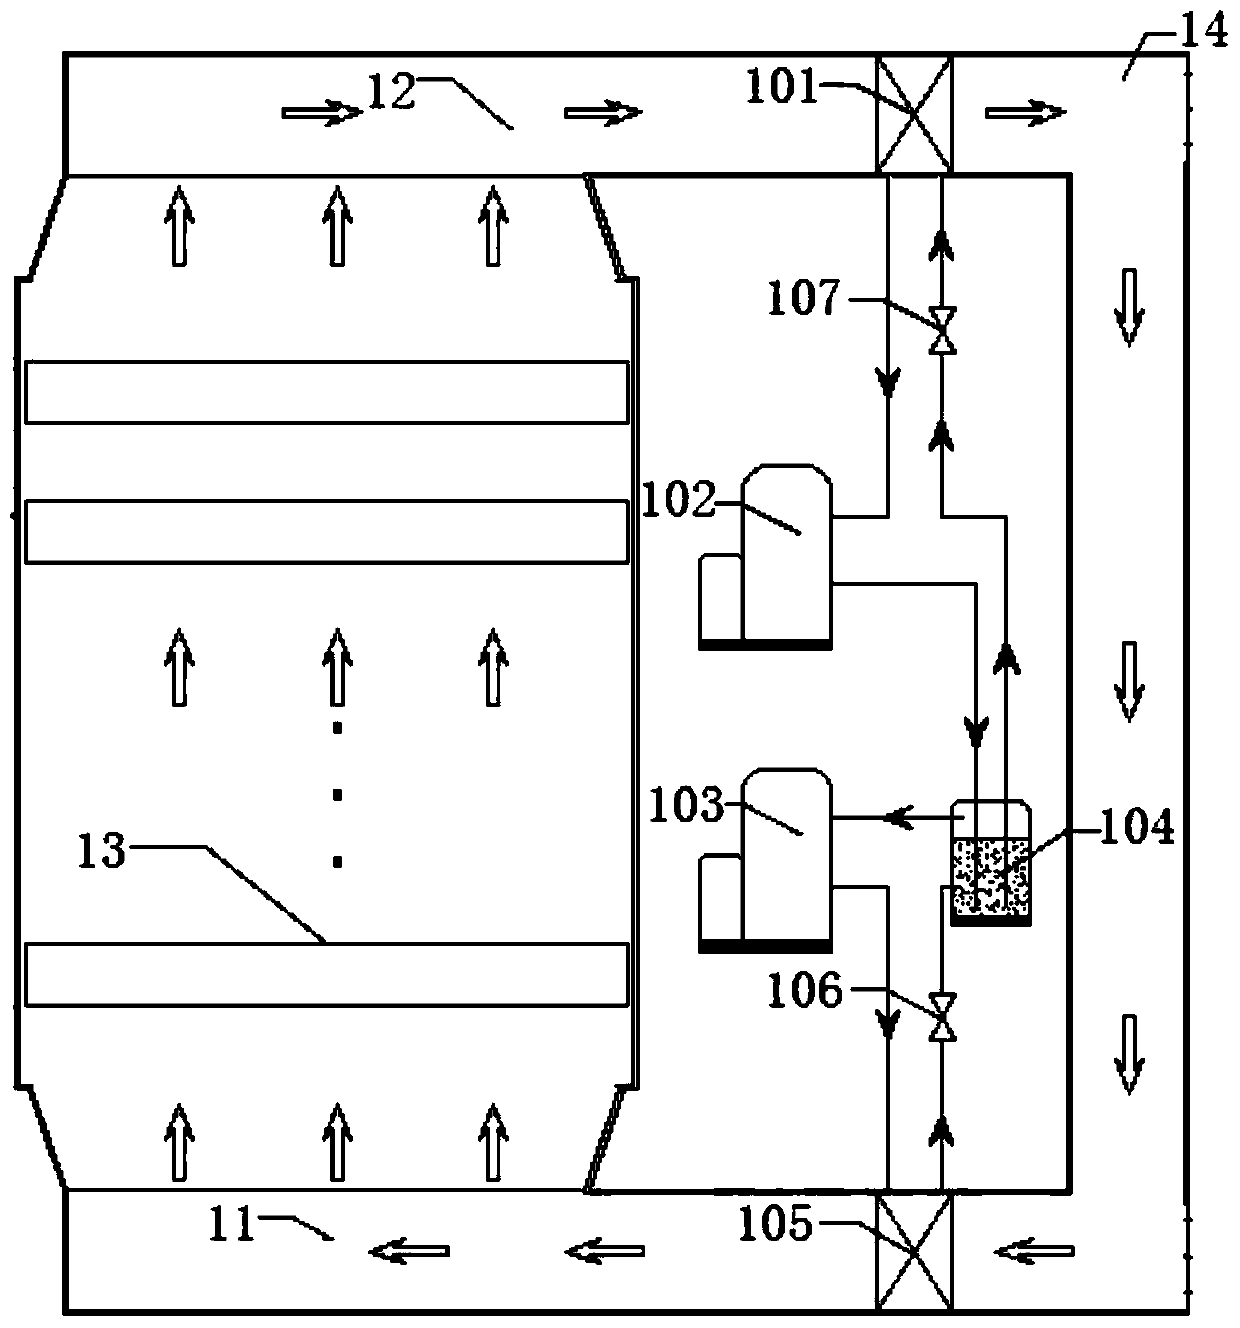 A multi-layer belt drying system based on two-stage heat pumps in parallel